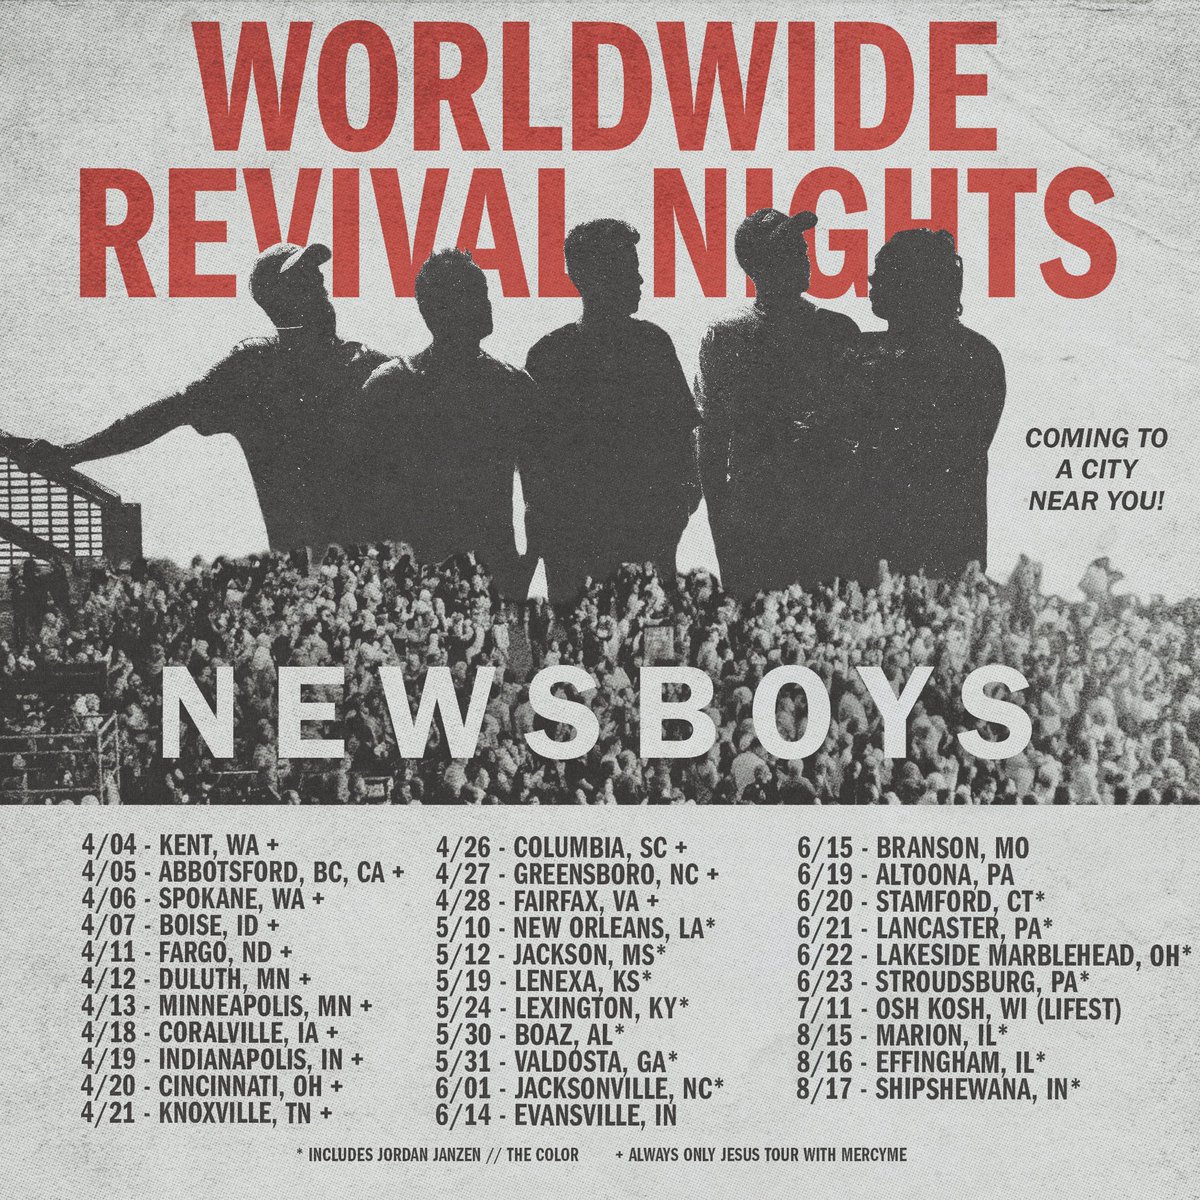 EVANSVILLE, INDIANA! 🗣️🗣️ NEW DATE ADDED 🚨🚨 We’re bringing Worldwide Revival Nights to your city in June! Use code “NEWSBOYS” to unlock presale today 👇🏻👇🏻 itickets.com/events/478410